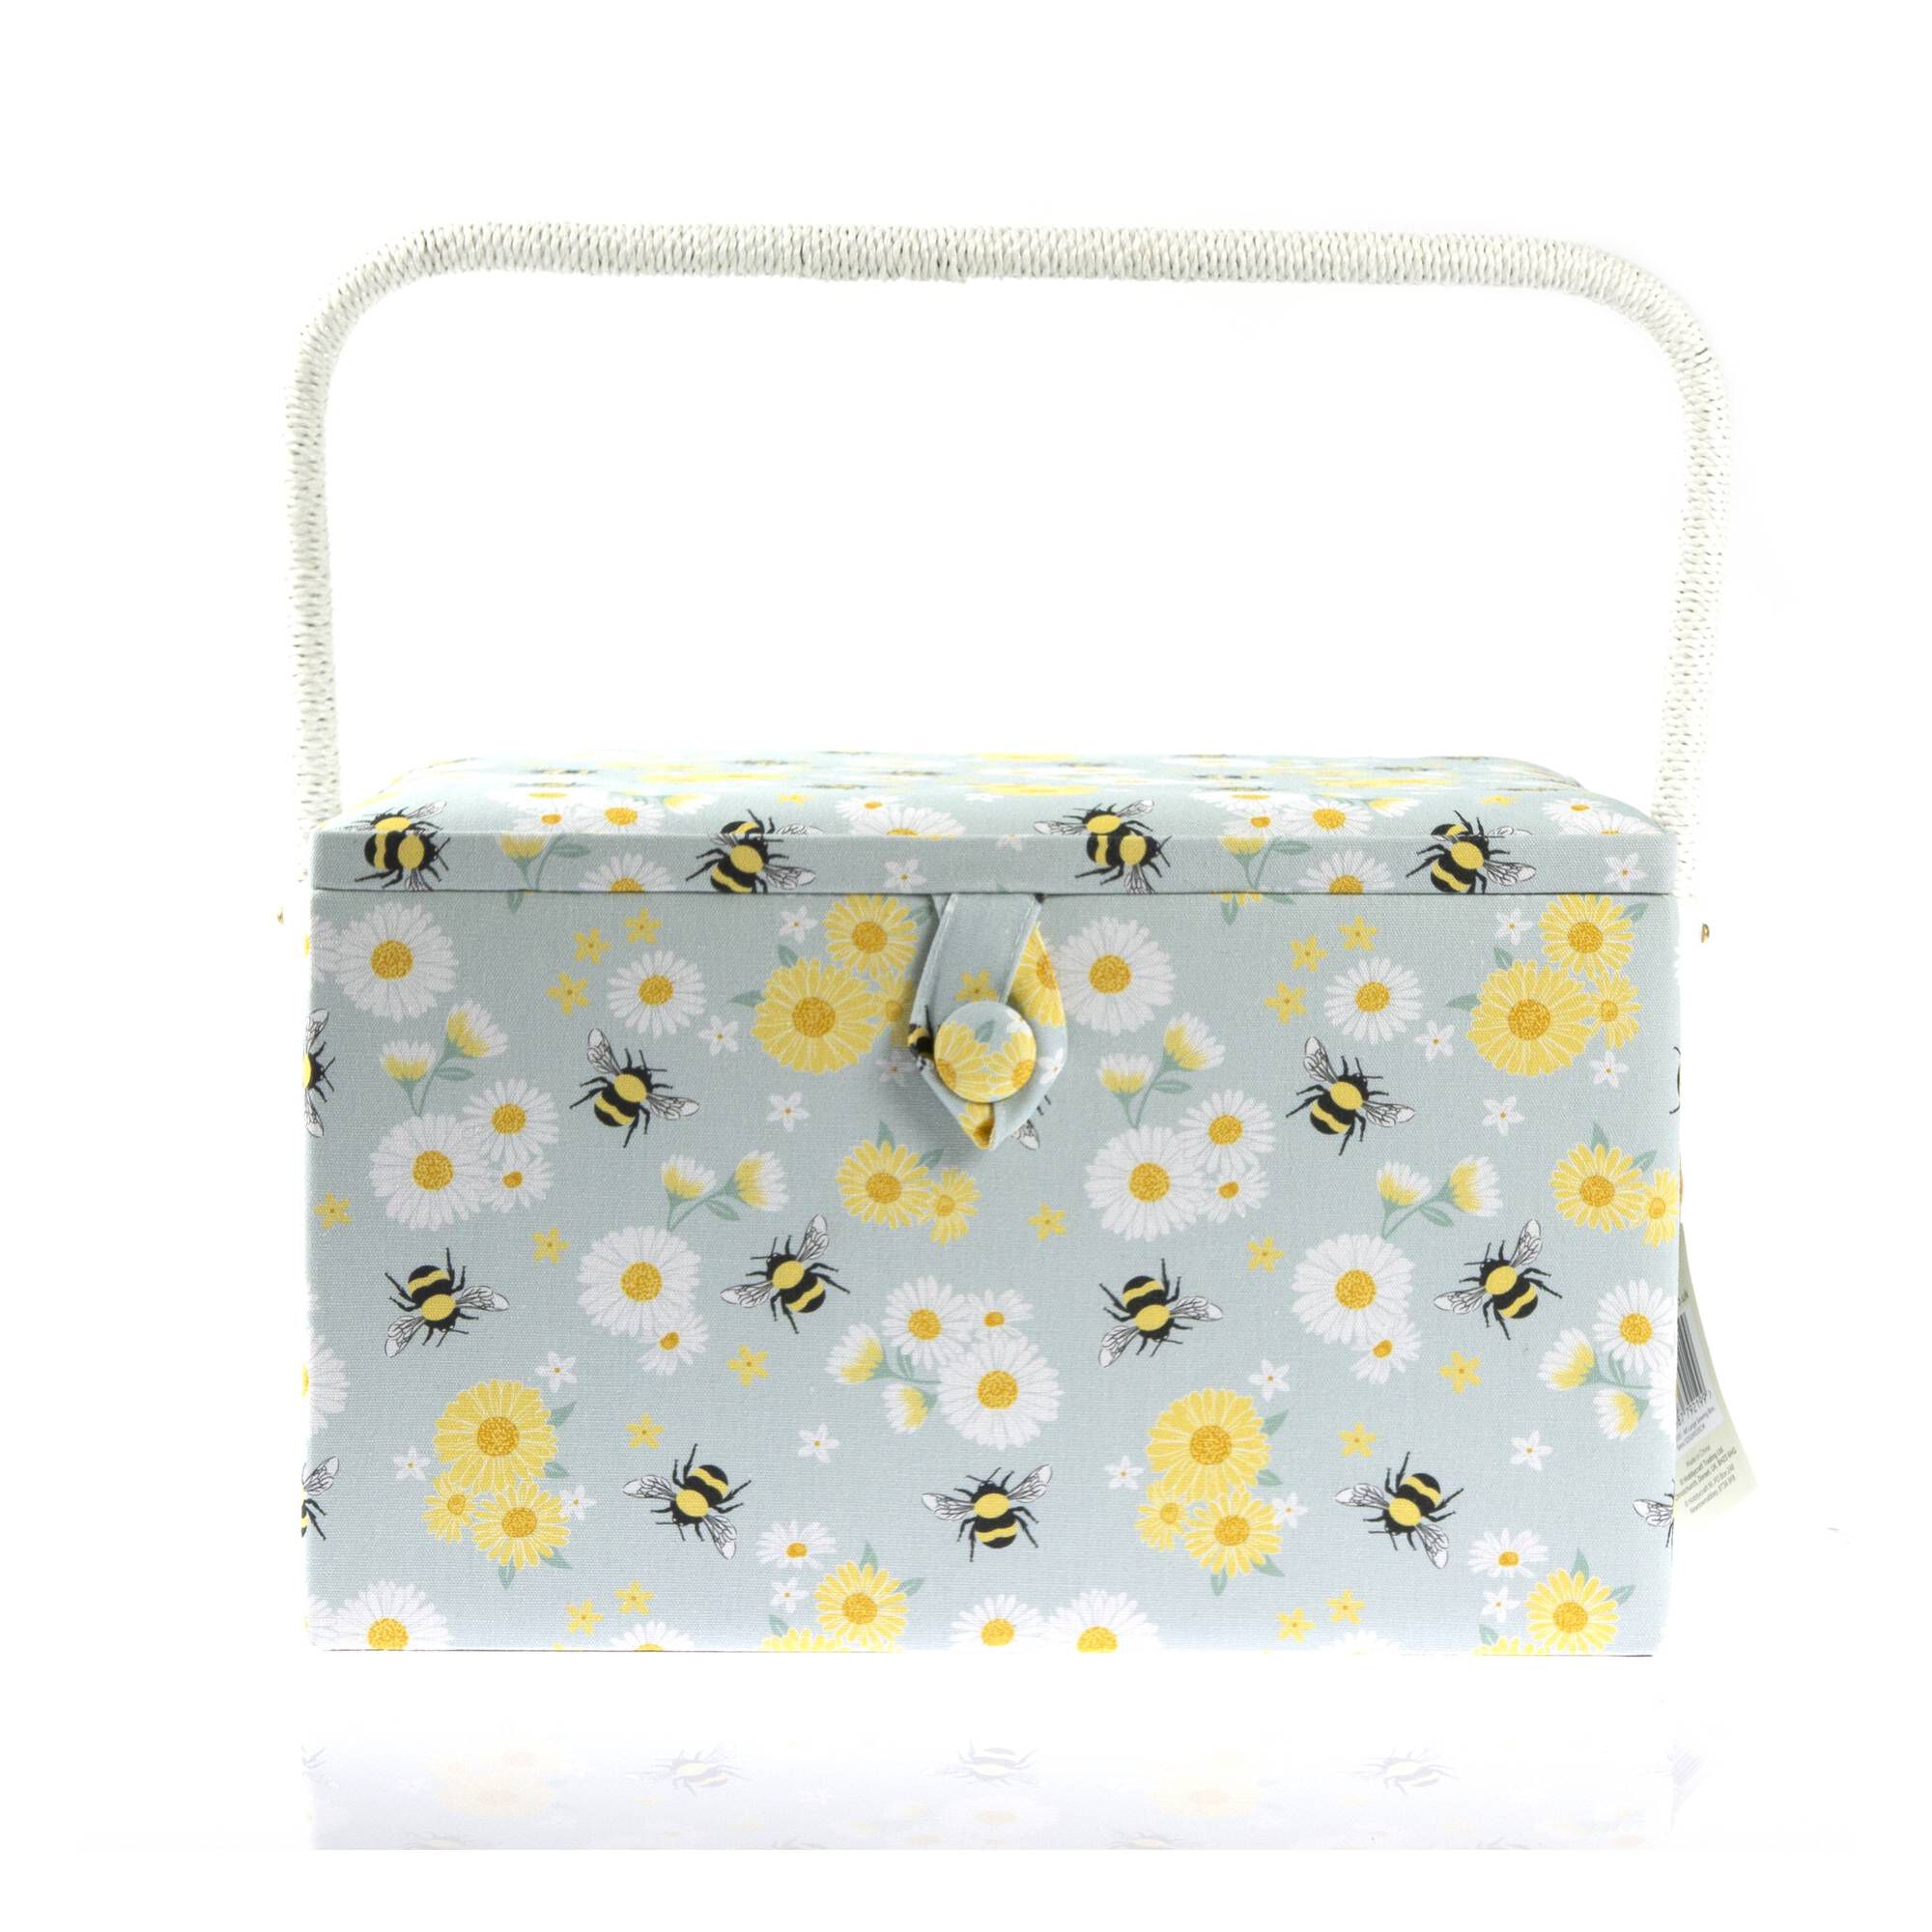 Women’s Institute Large Bee Sewing Box | Hobbycraft